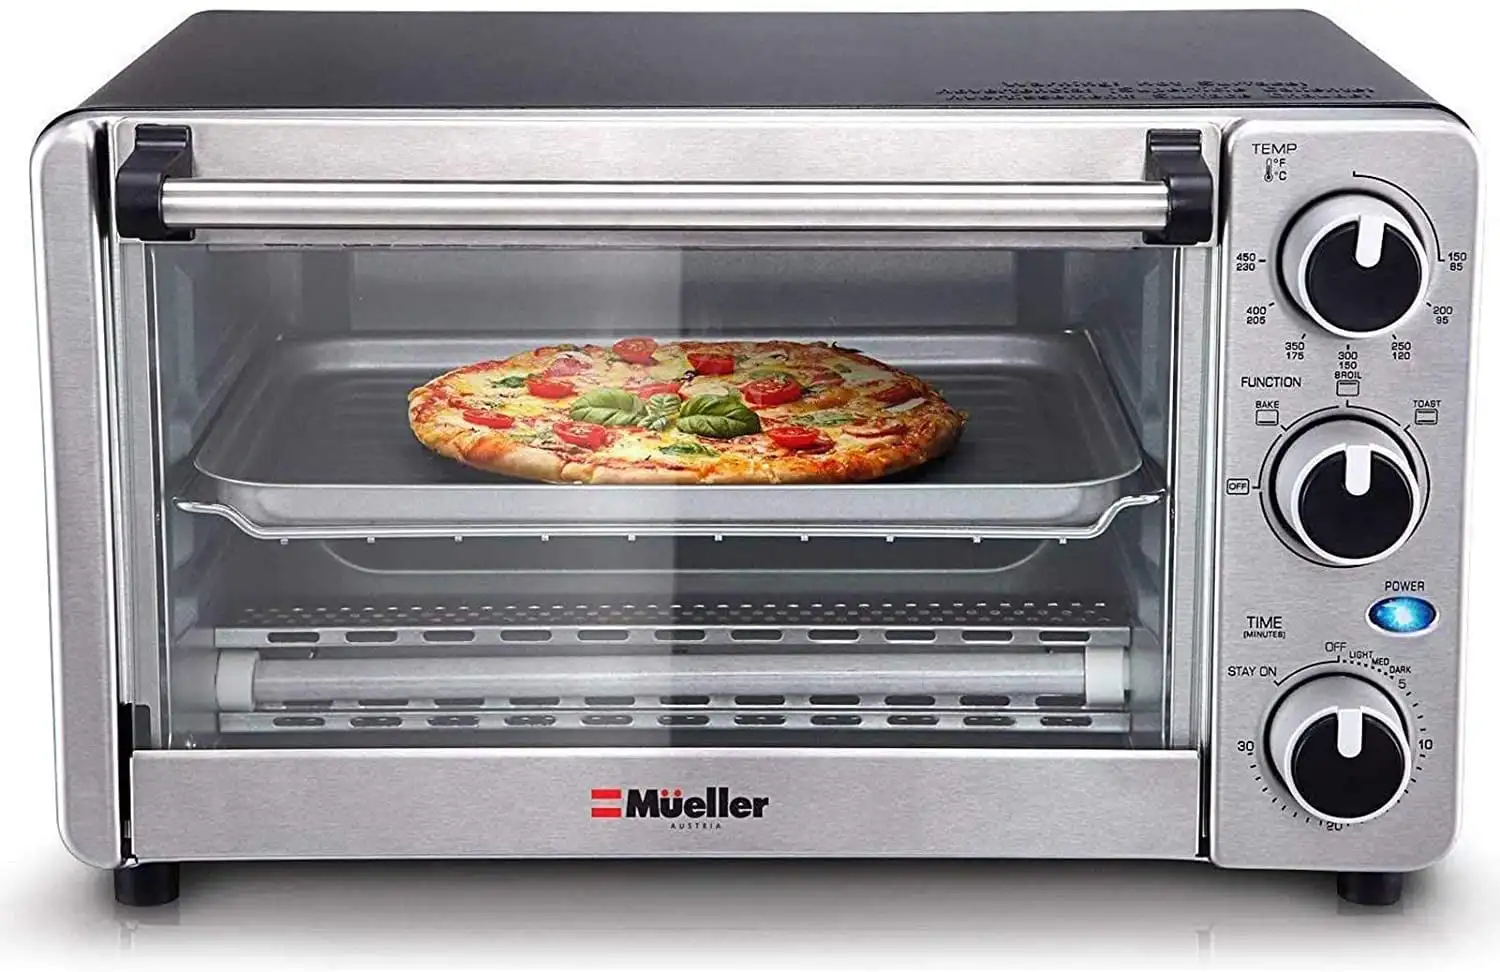 Toaster Oven 4 Slice, Multi-Function Stainless Steel Finish by , Includes Baking Pan and Rack free shipping